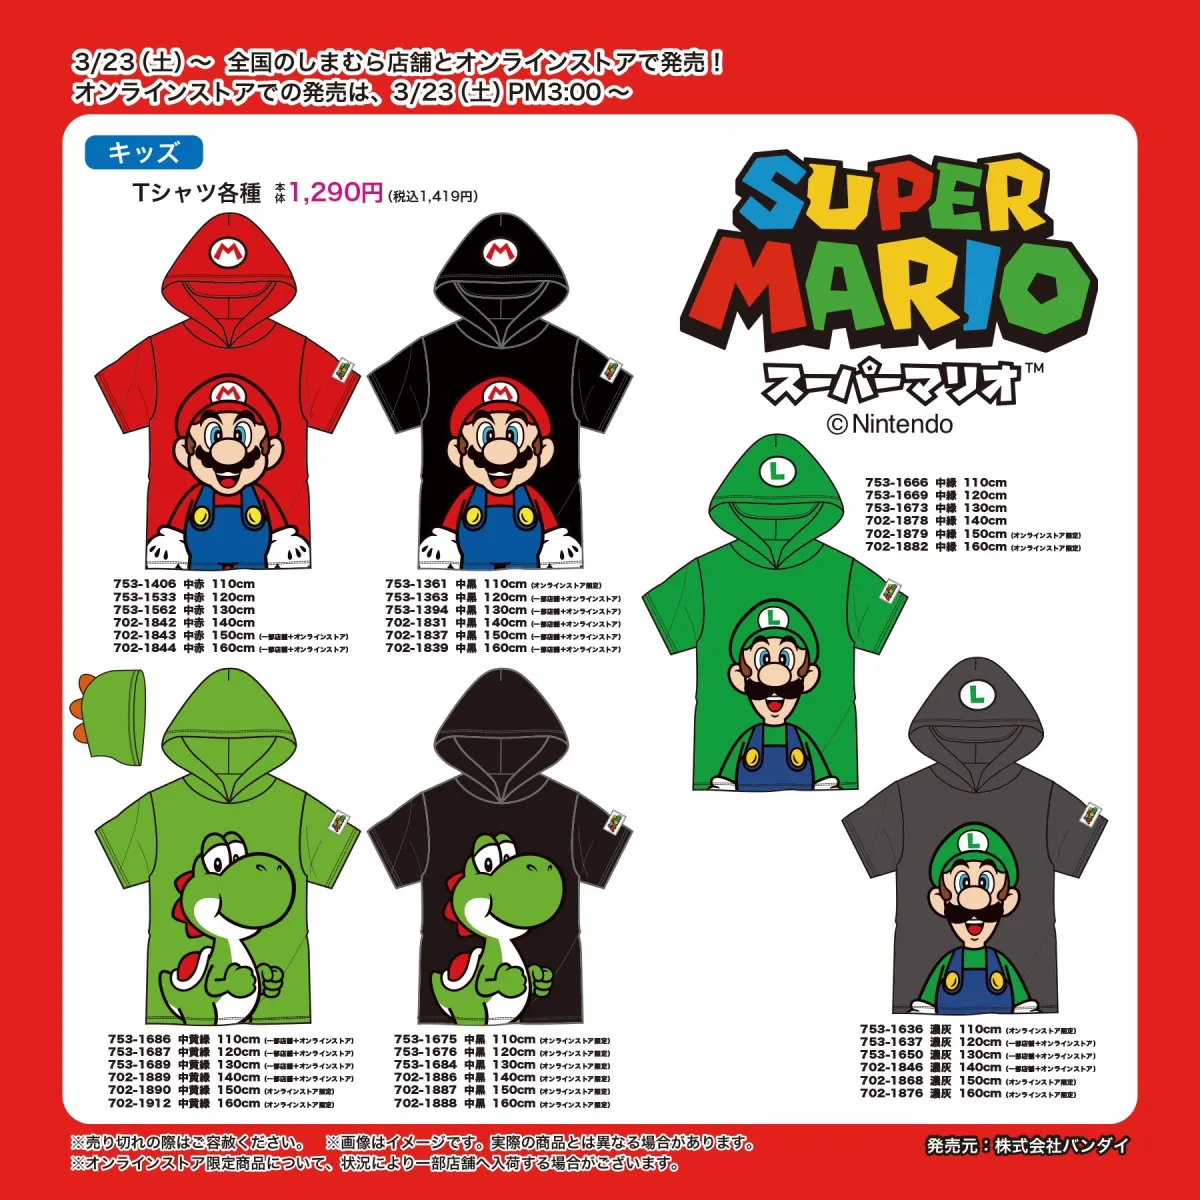 New Super Mario Kids and Men's Apparel Appears at Shimamura